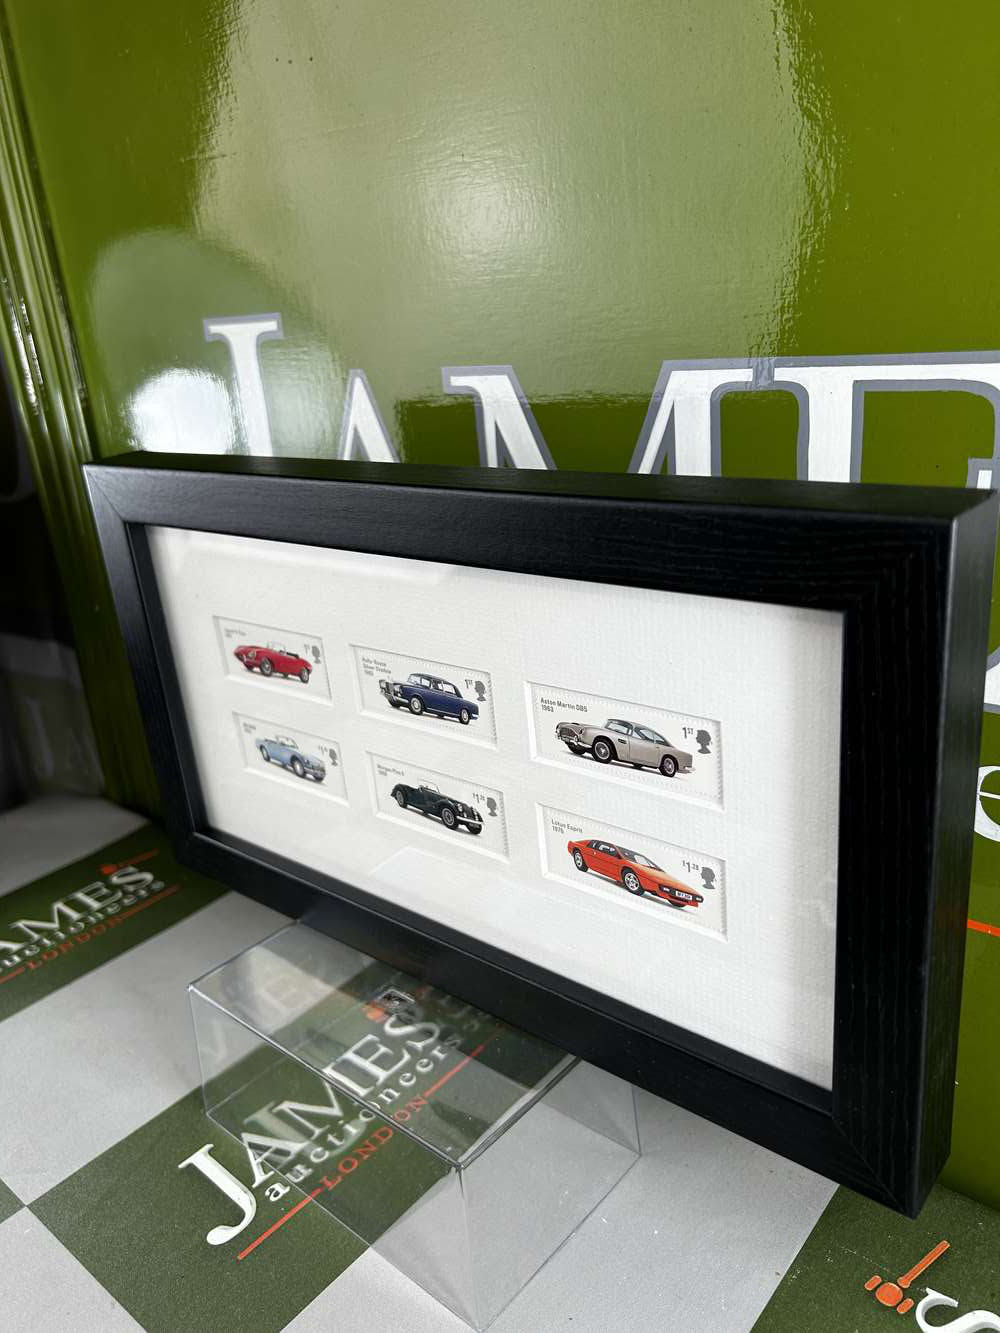 British Car Legends -1st Class Stamps Framed Edition - Image 6 of 9